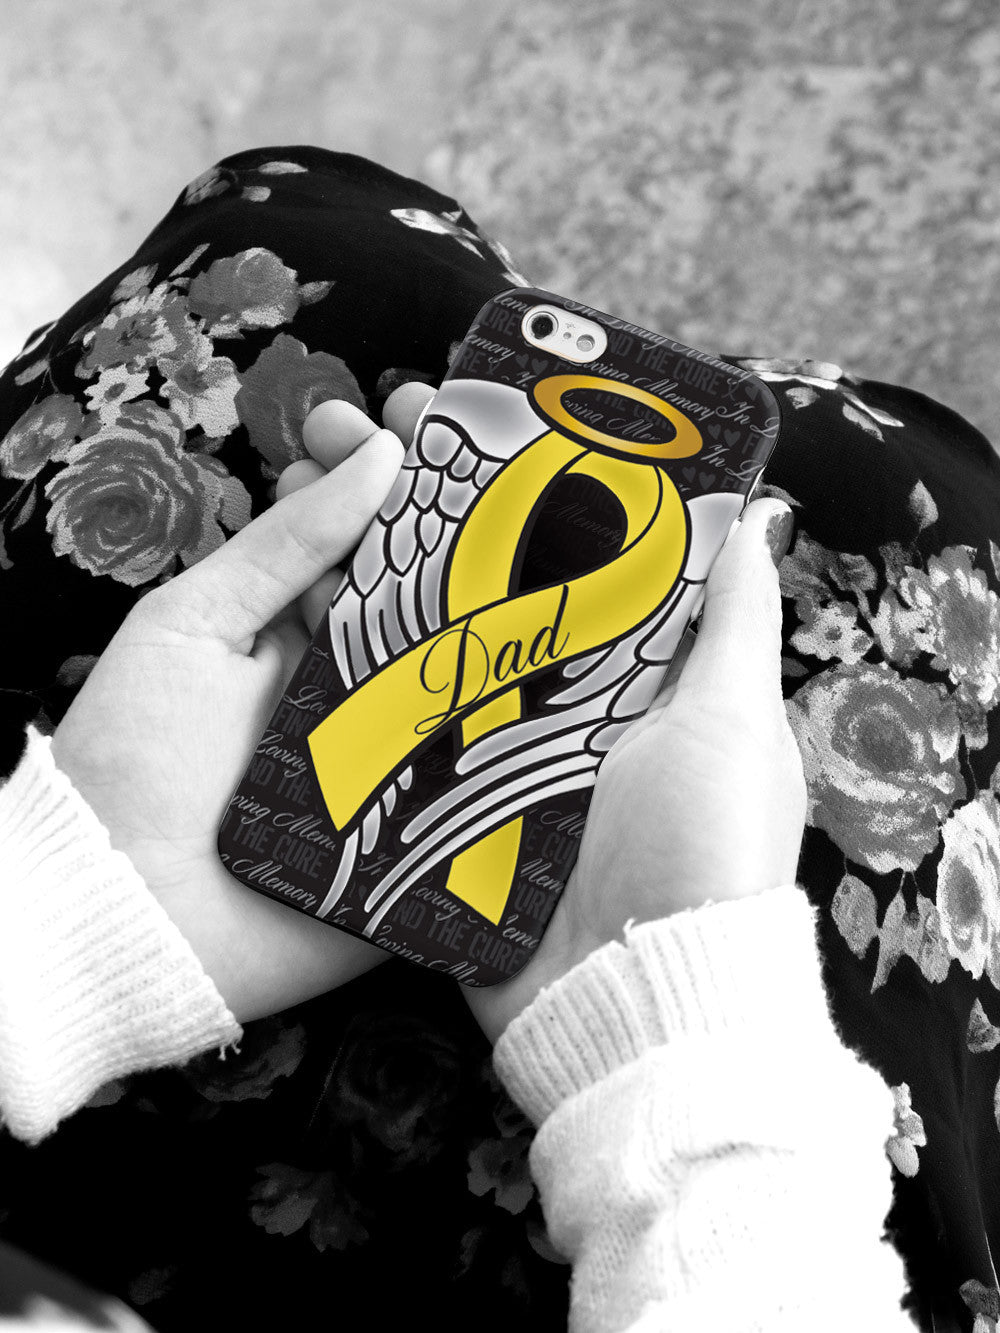 In Loving Memory of My Dad - Yellow Ribbon Case